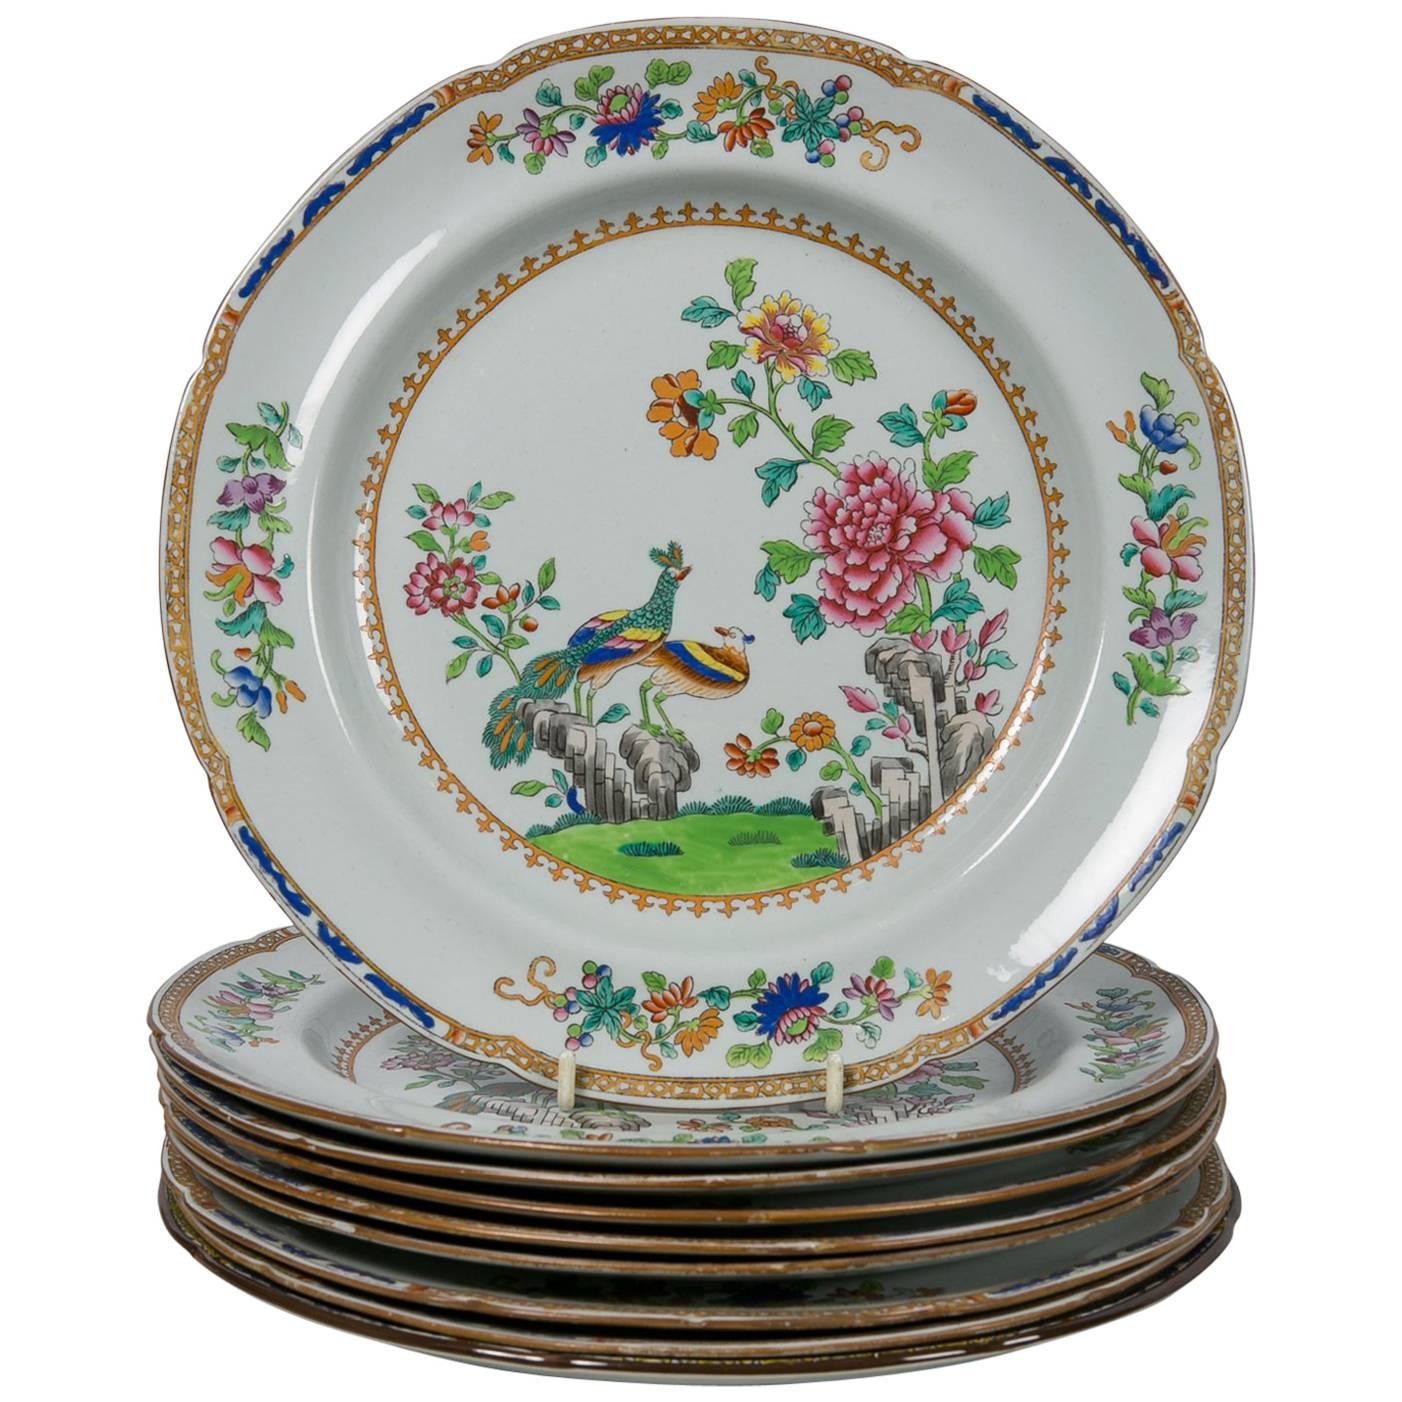 Spode Peacock Pattern Ironstone Dishes